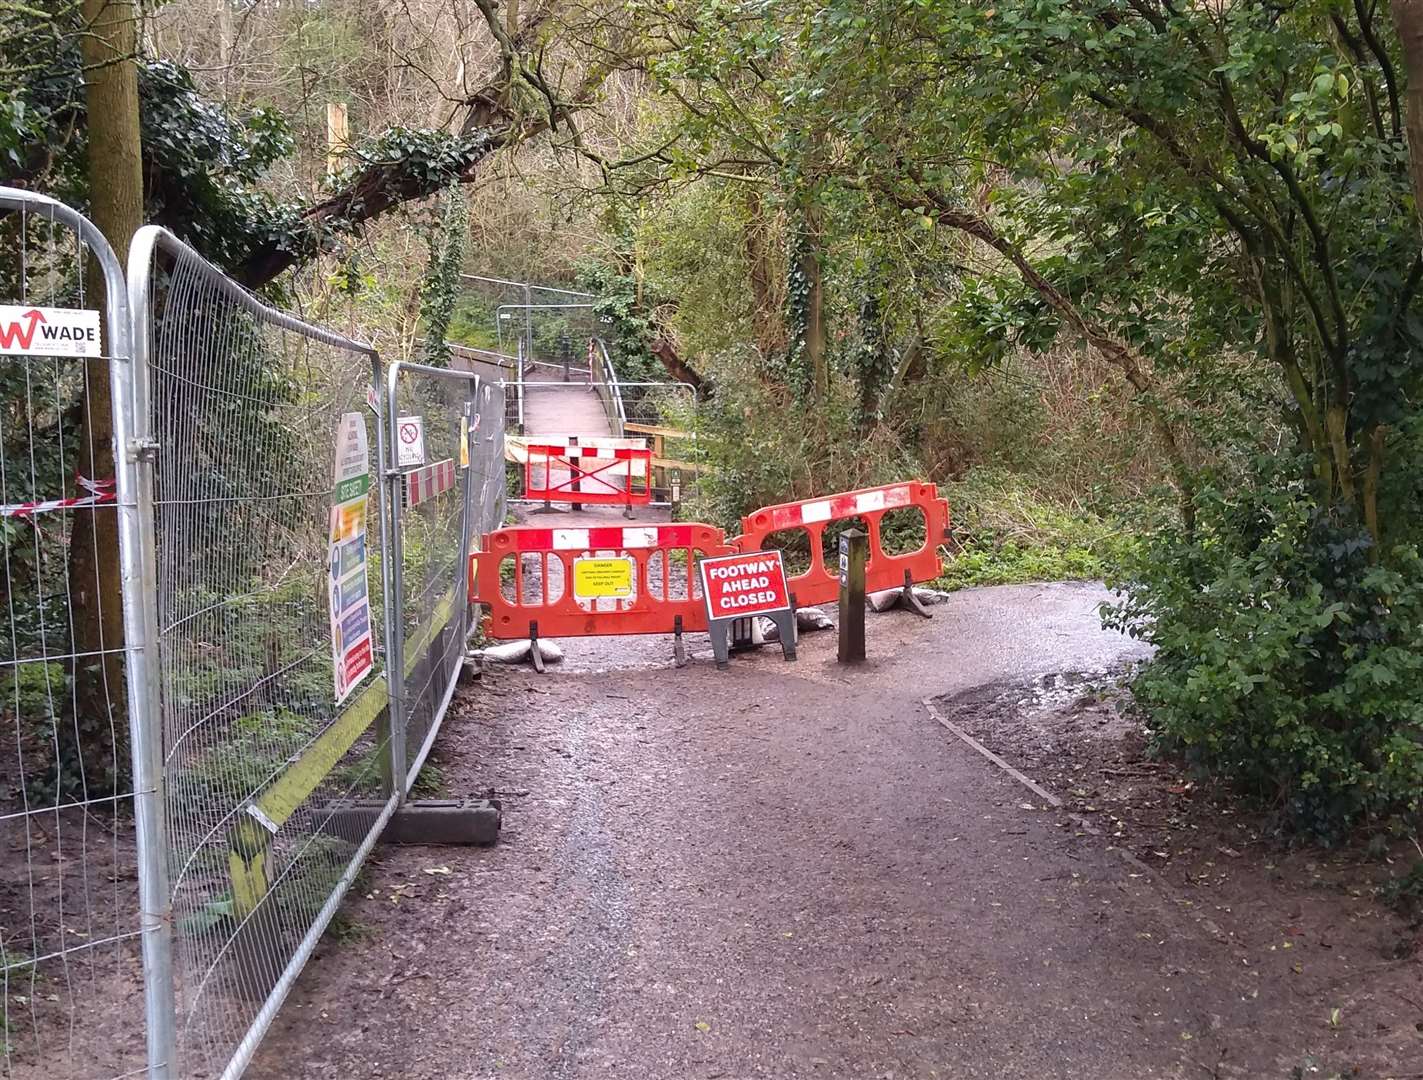 The council installed fencing earlier this year to stop walkers using the dangerous section of path